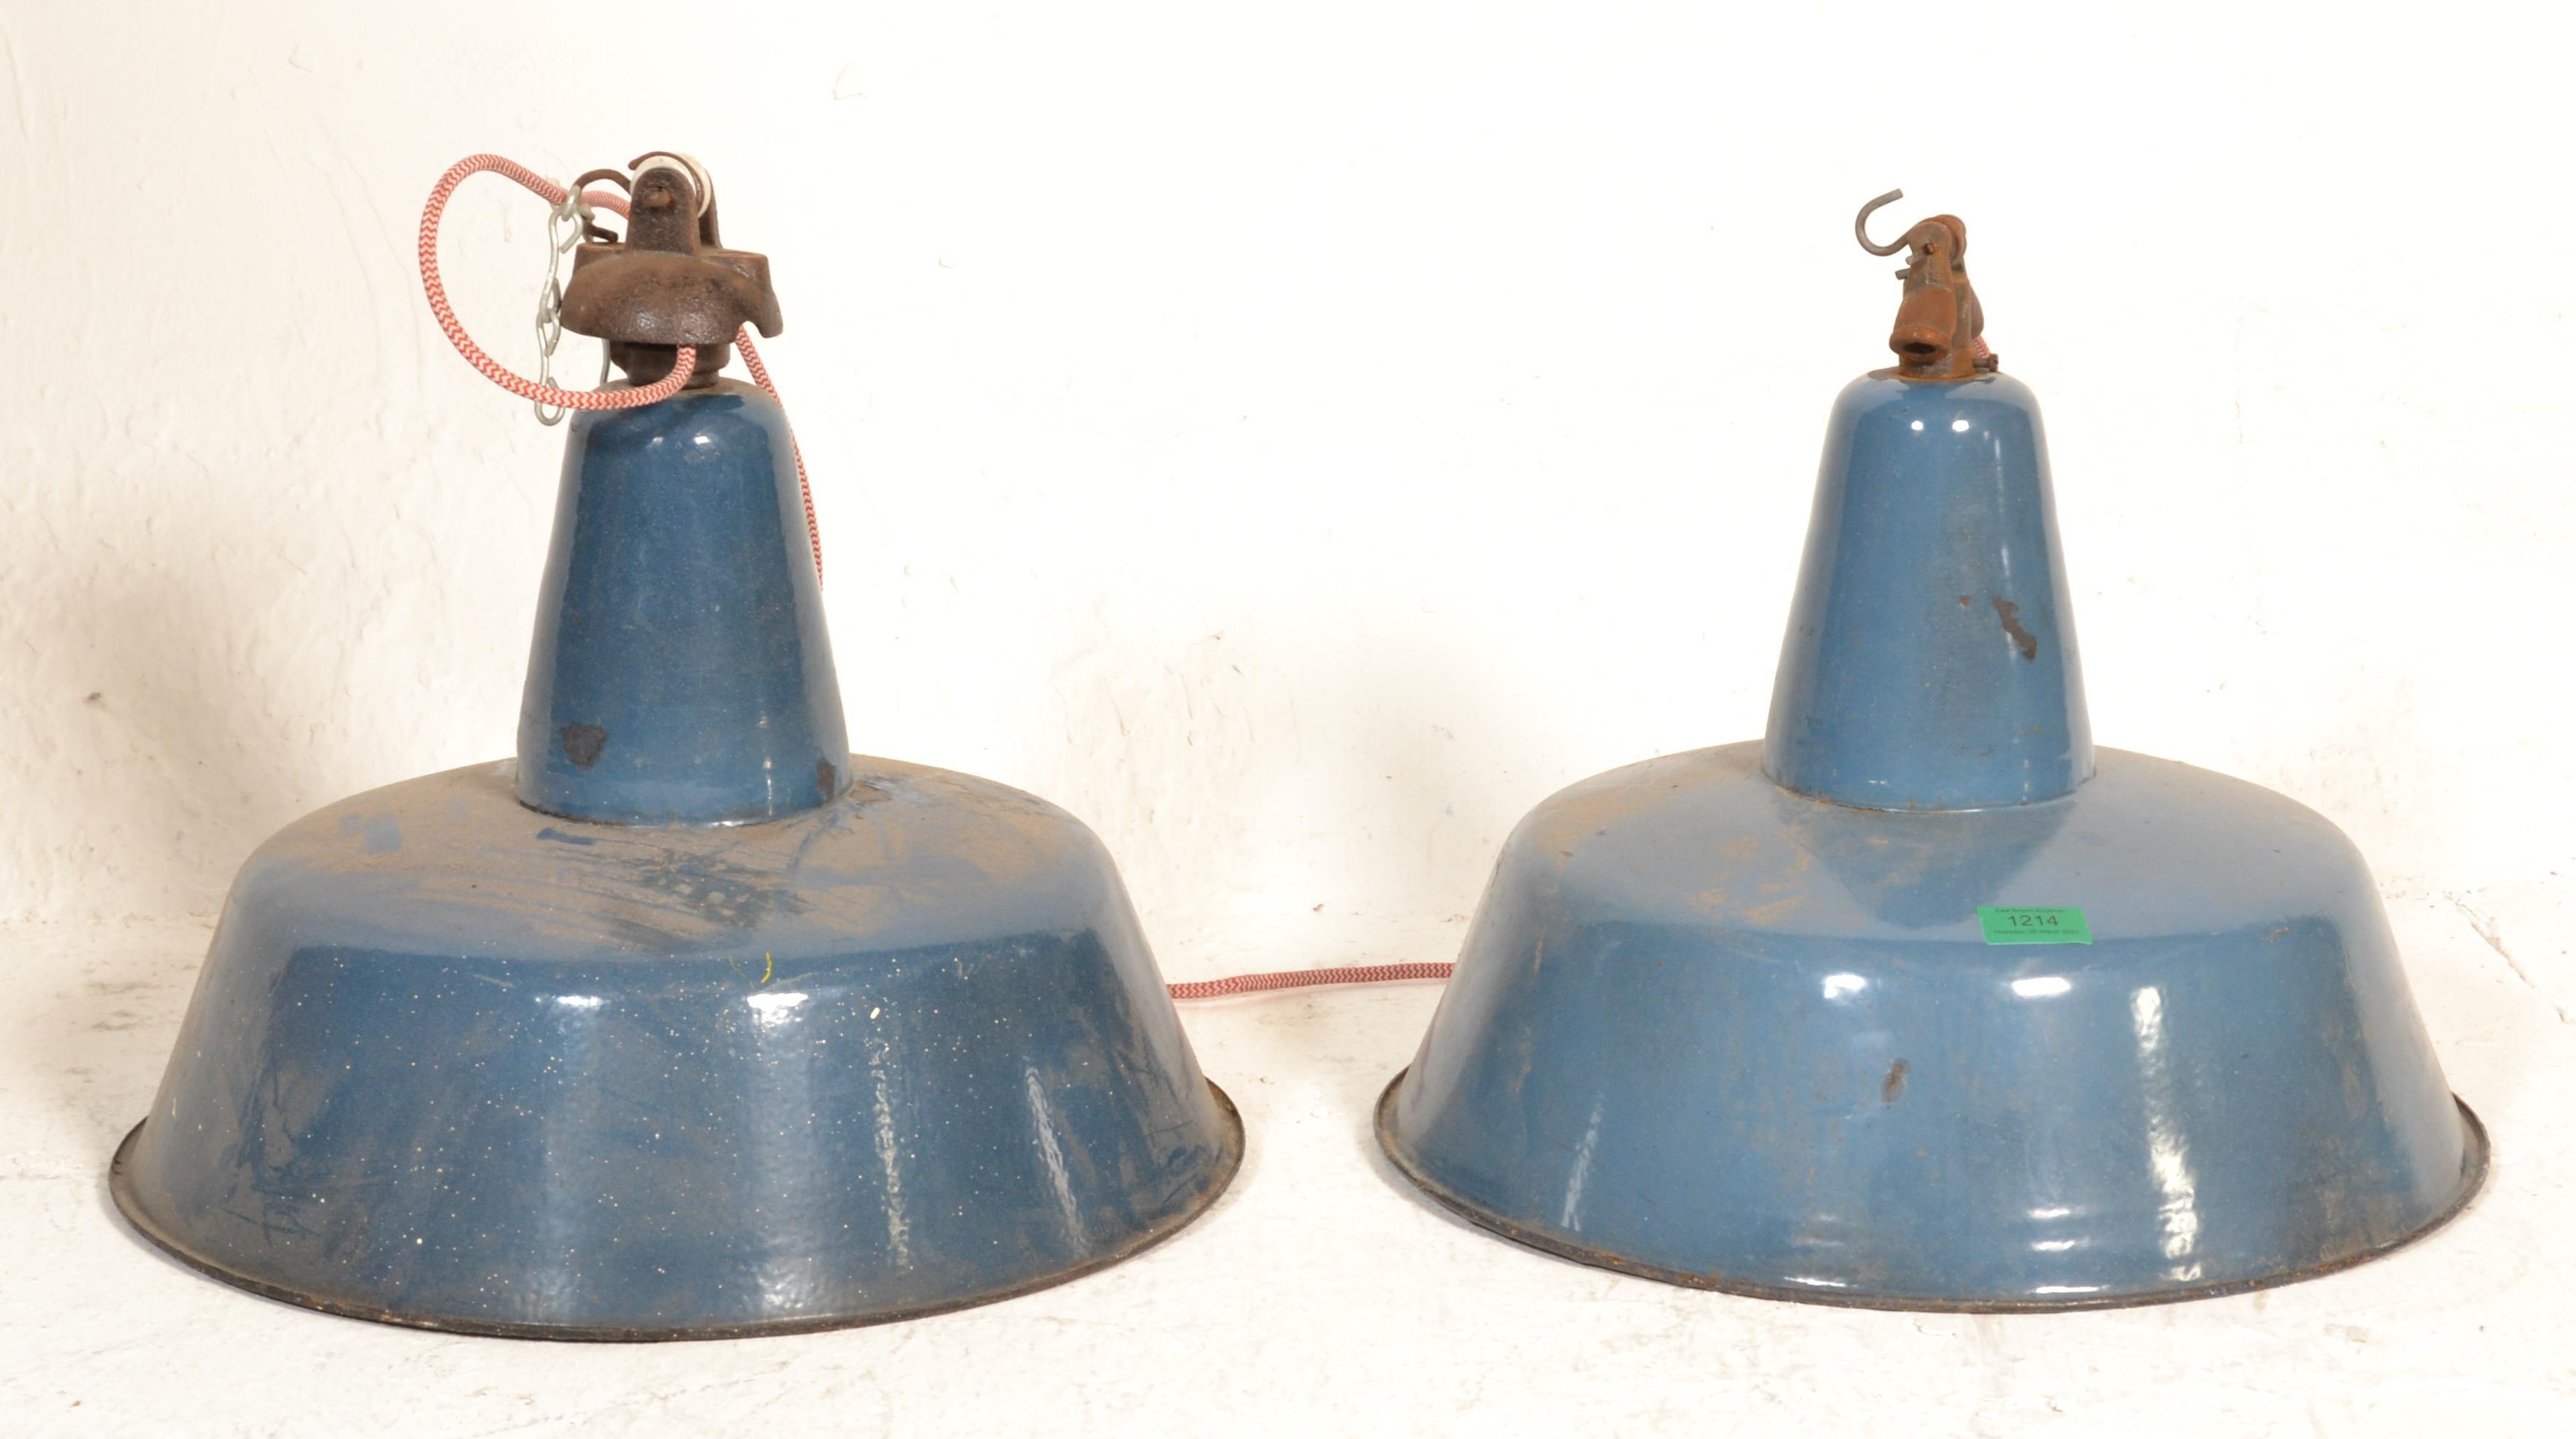 A pair of large Industrial factory enamelled metal ufo - space age pendant shades. Each in